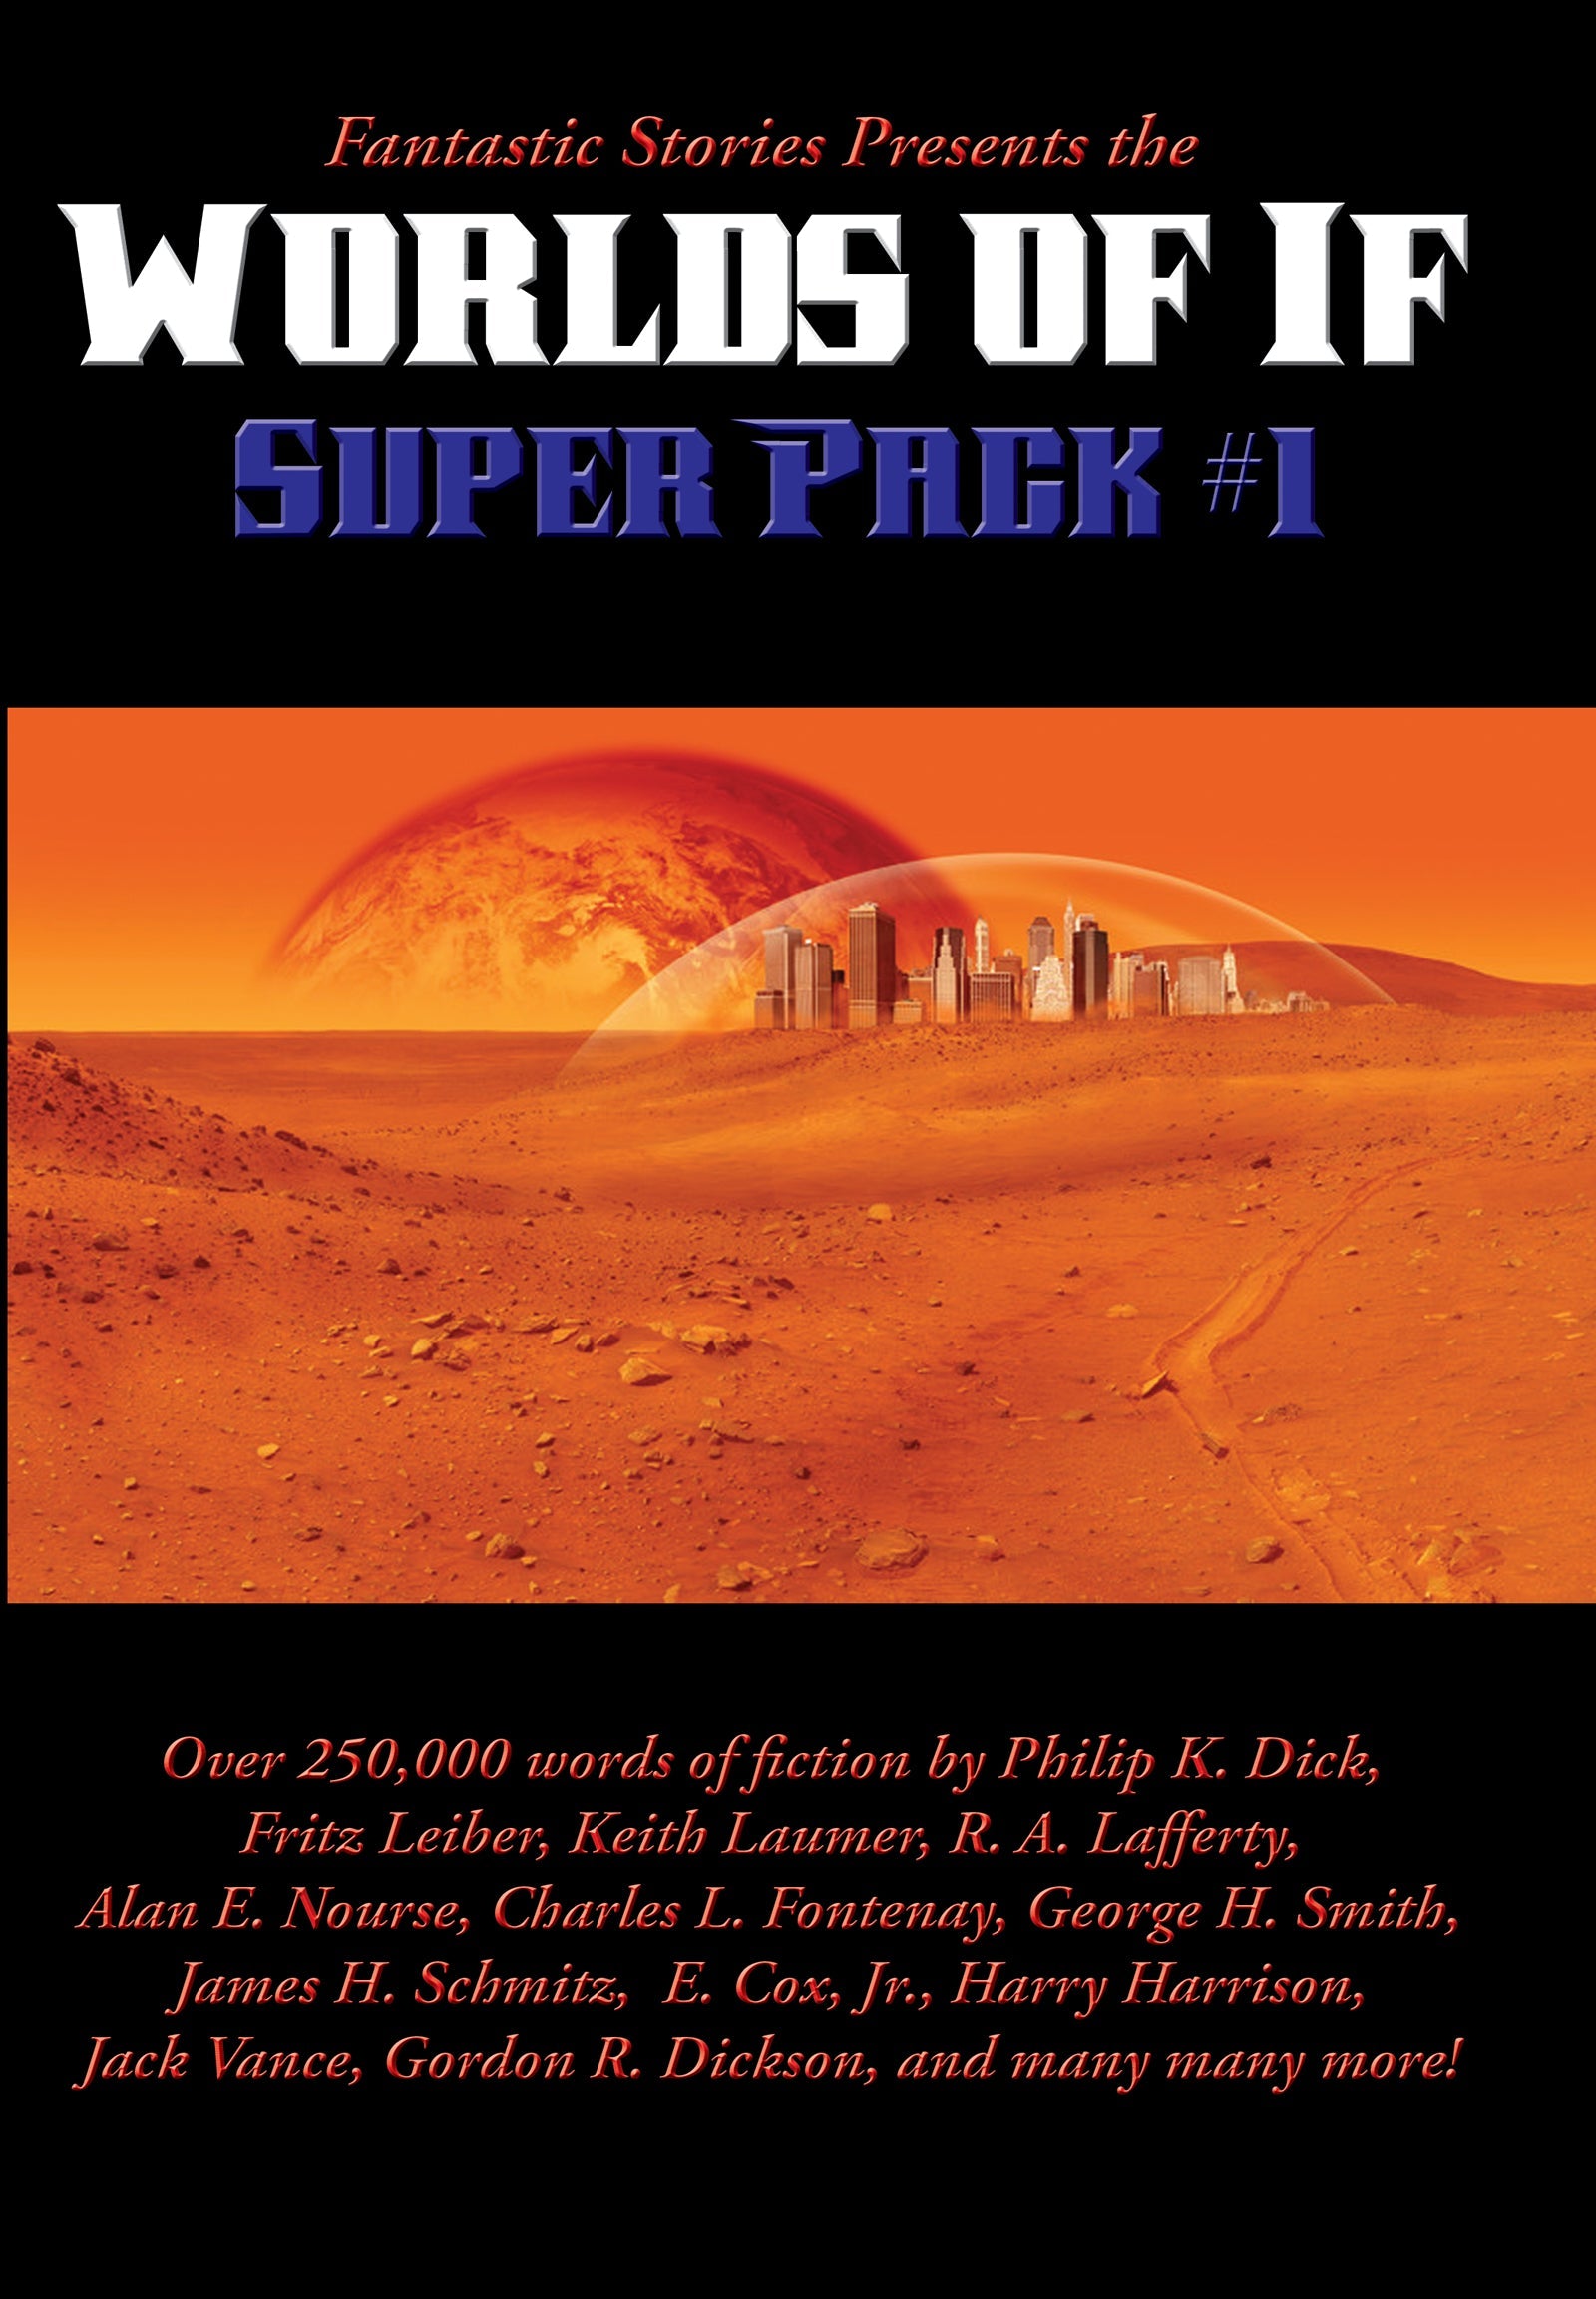 Cover art for Positronic Super Pack #29, the first Worlds of If Super Pack.